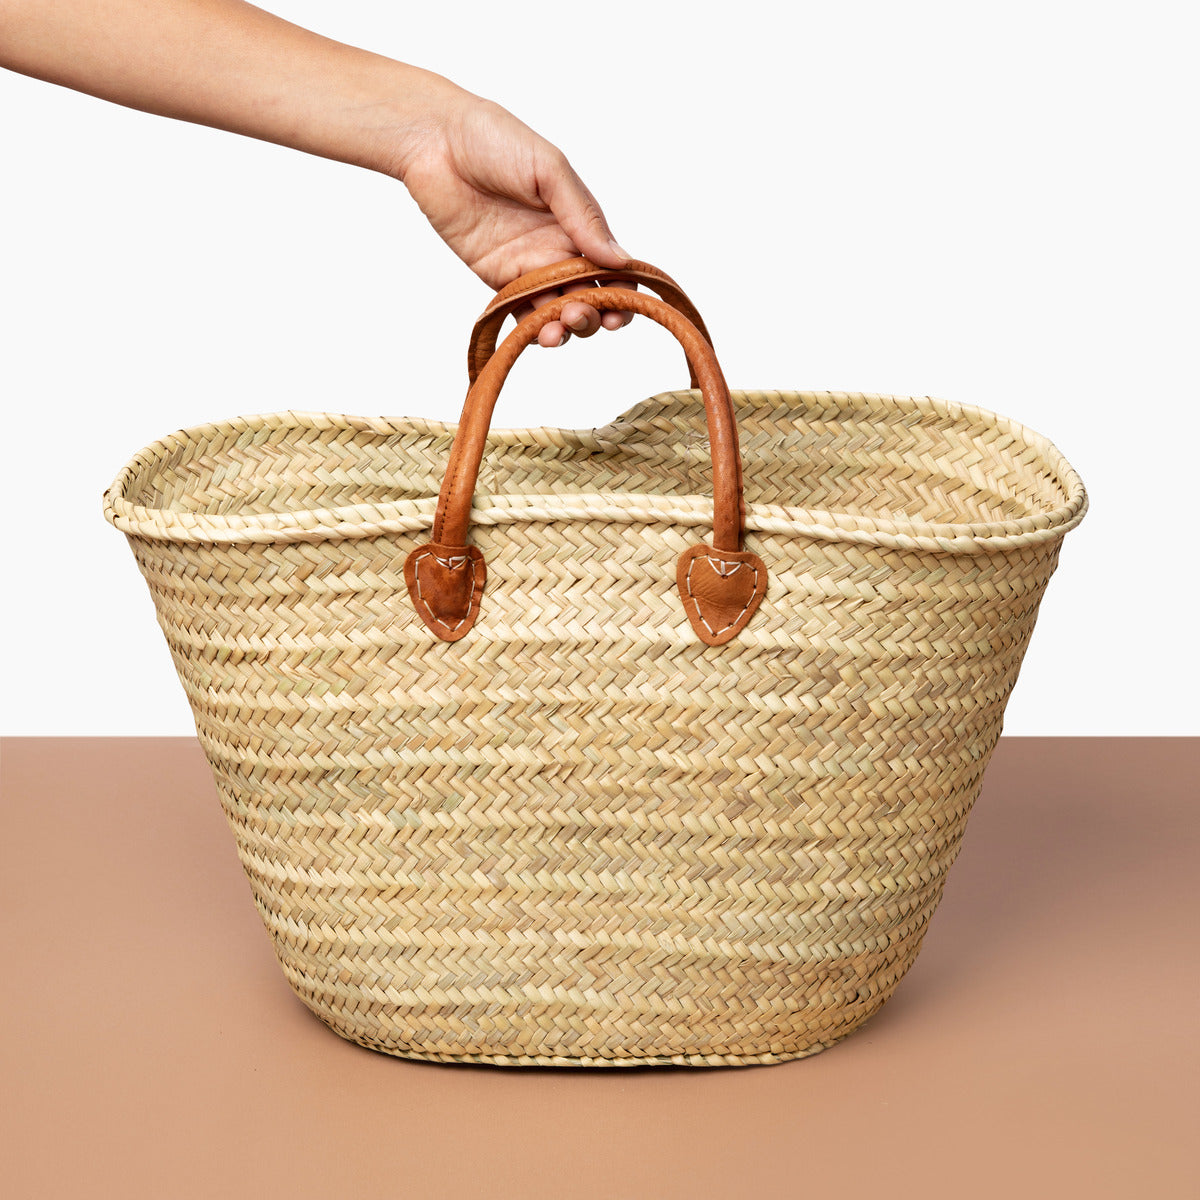 Wholesale French Market Basket with leather straps, Moroccan Straw